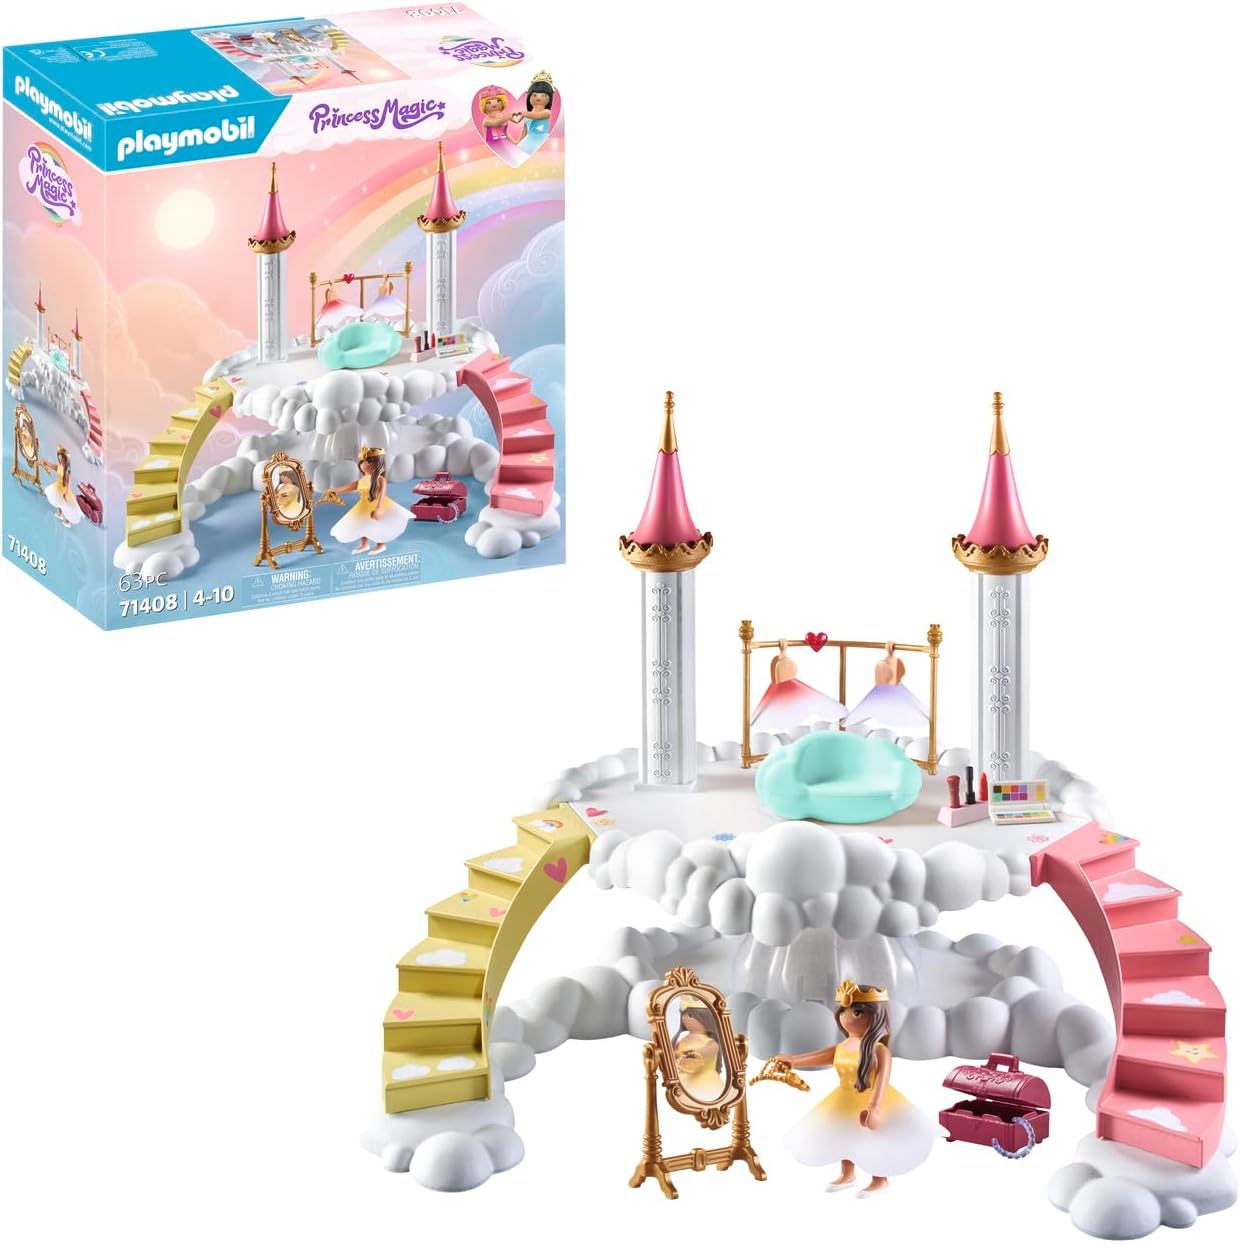 PLAYMOBIL Princess Magic 71408 Heavenly Dressing Cloud, Royal Dressing Room in the Clouds, with Three Skirts, a Sparkling Tiara and Other Accessories, Toy for Children from 4 Years